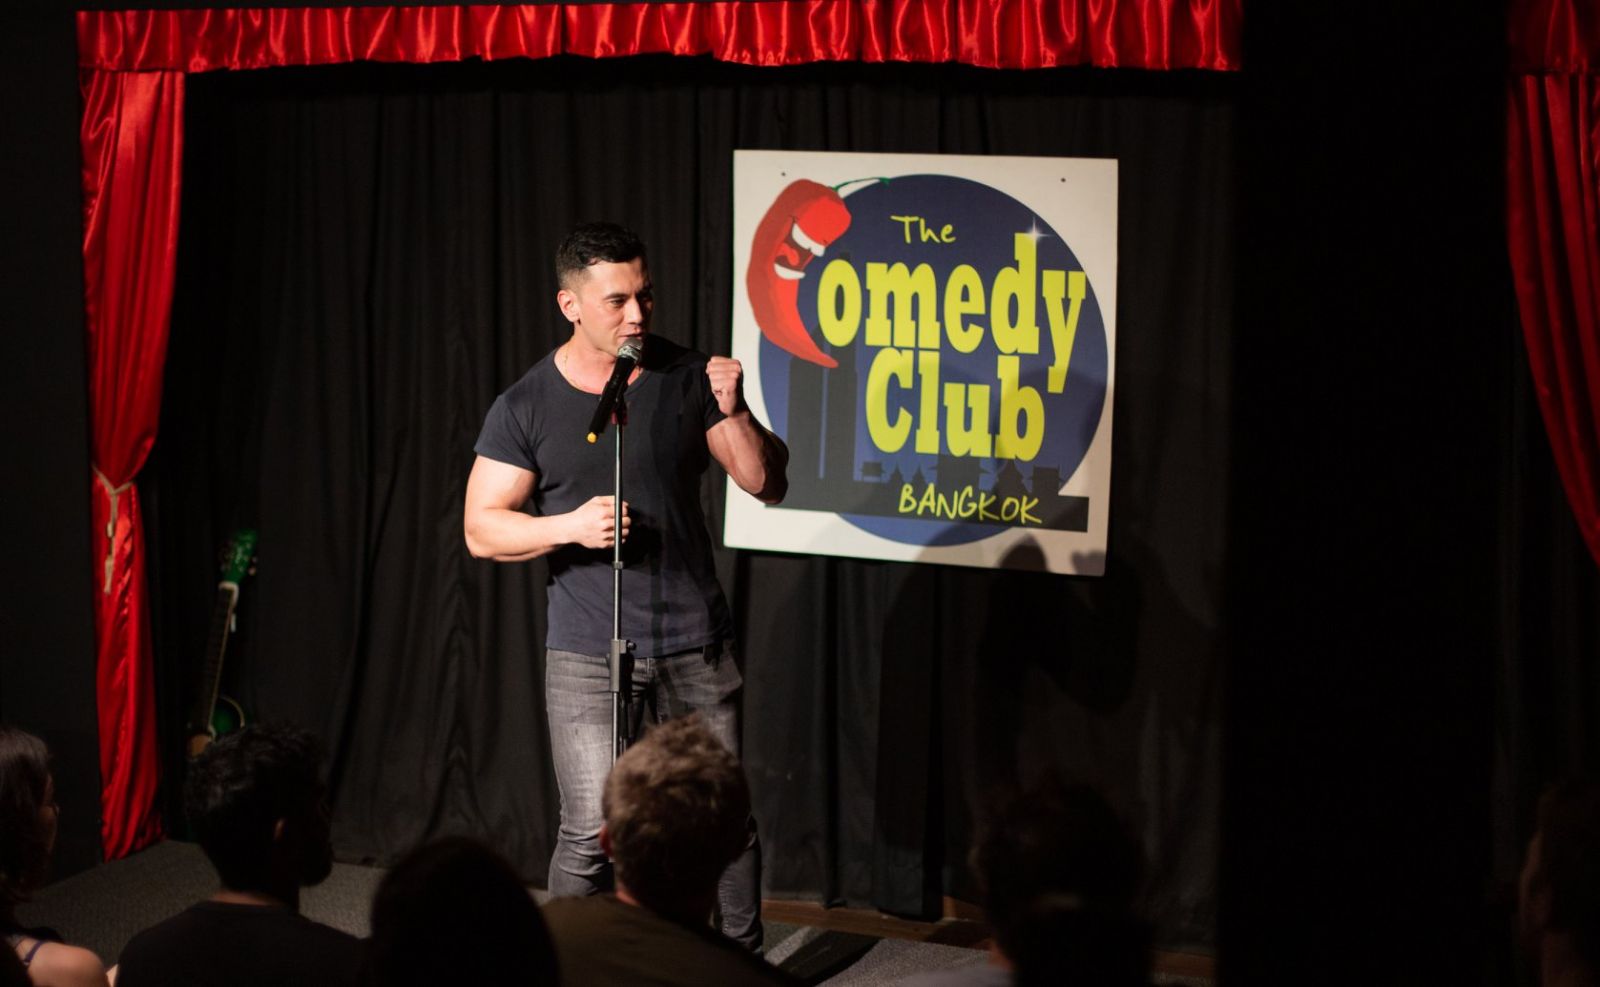 Committed to comedy 